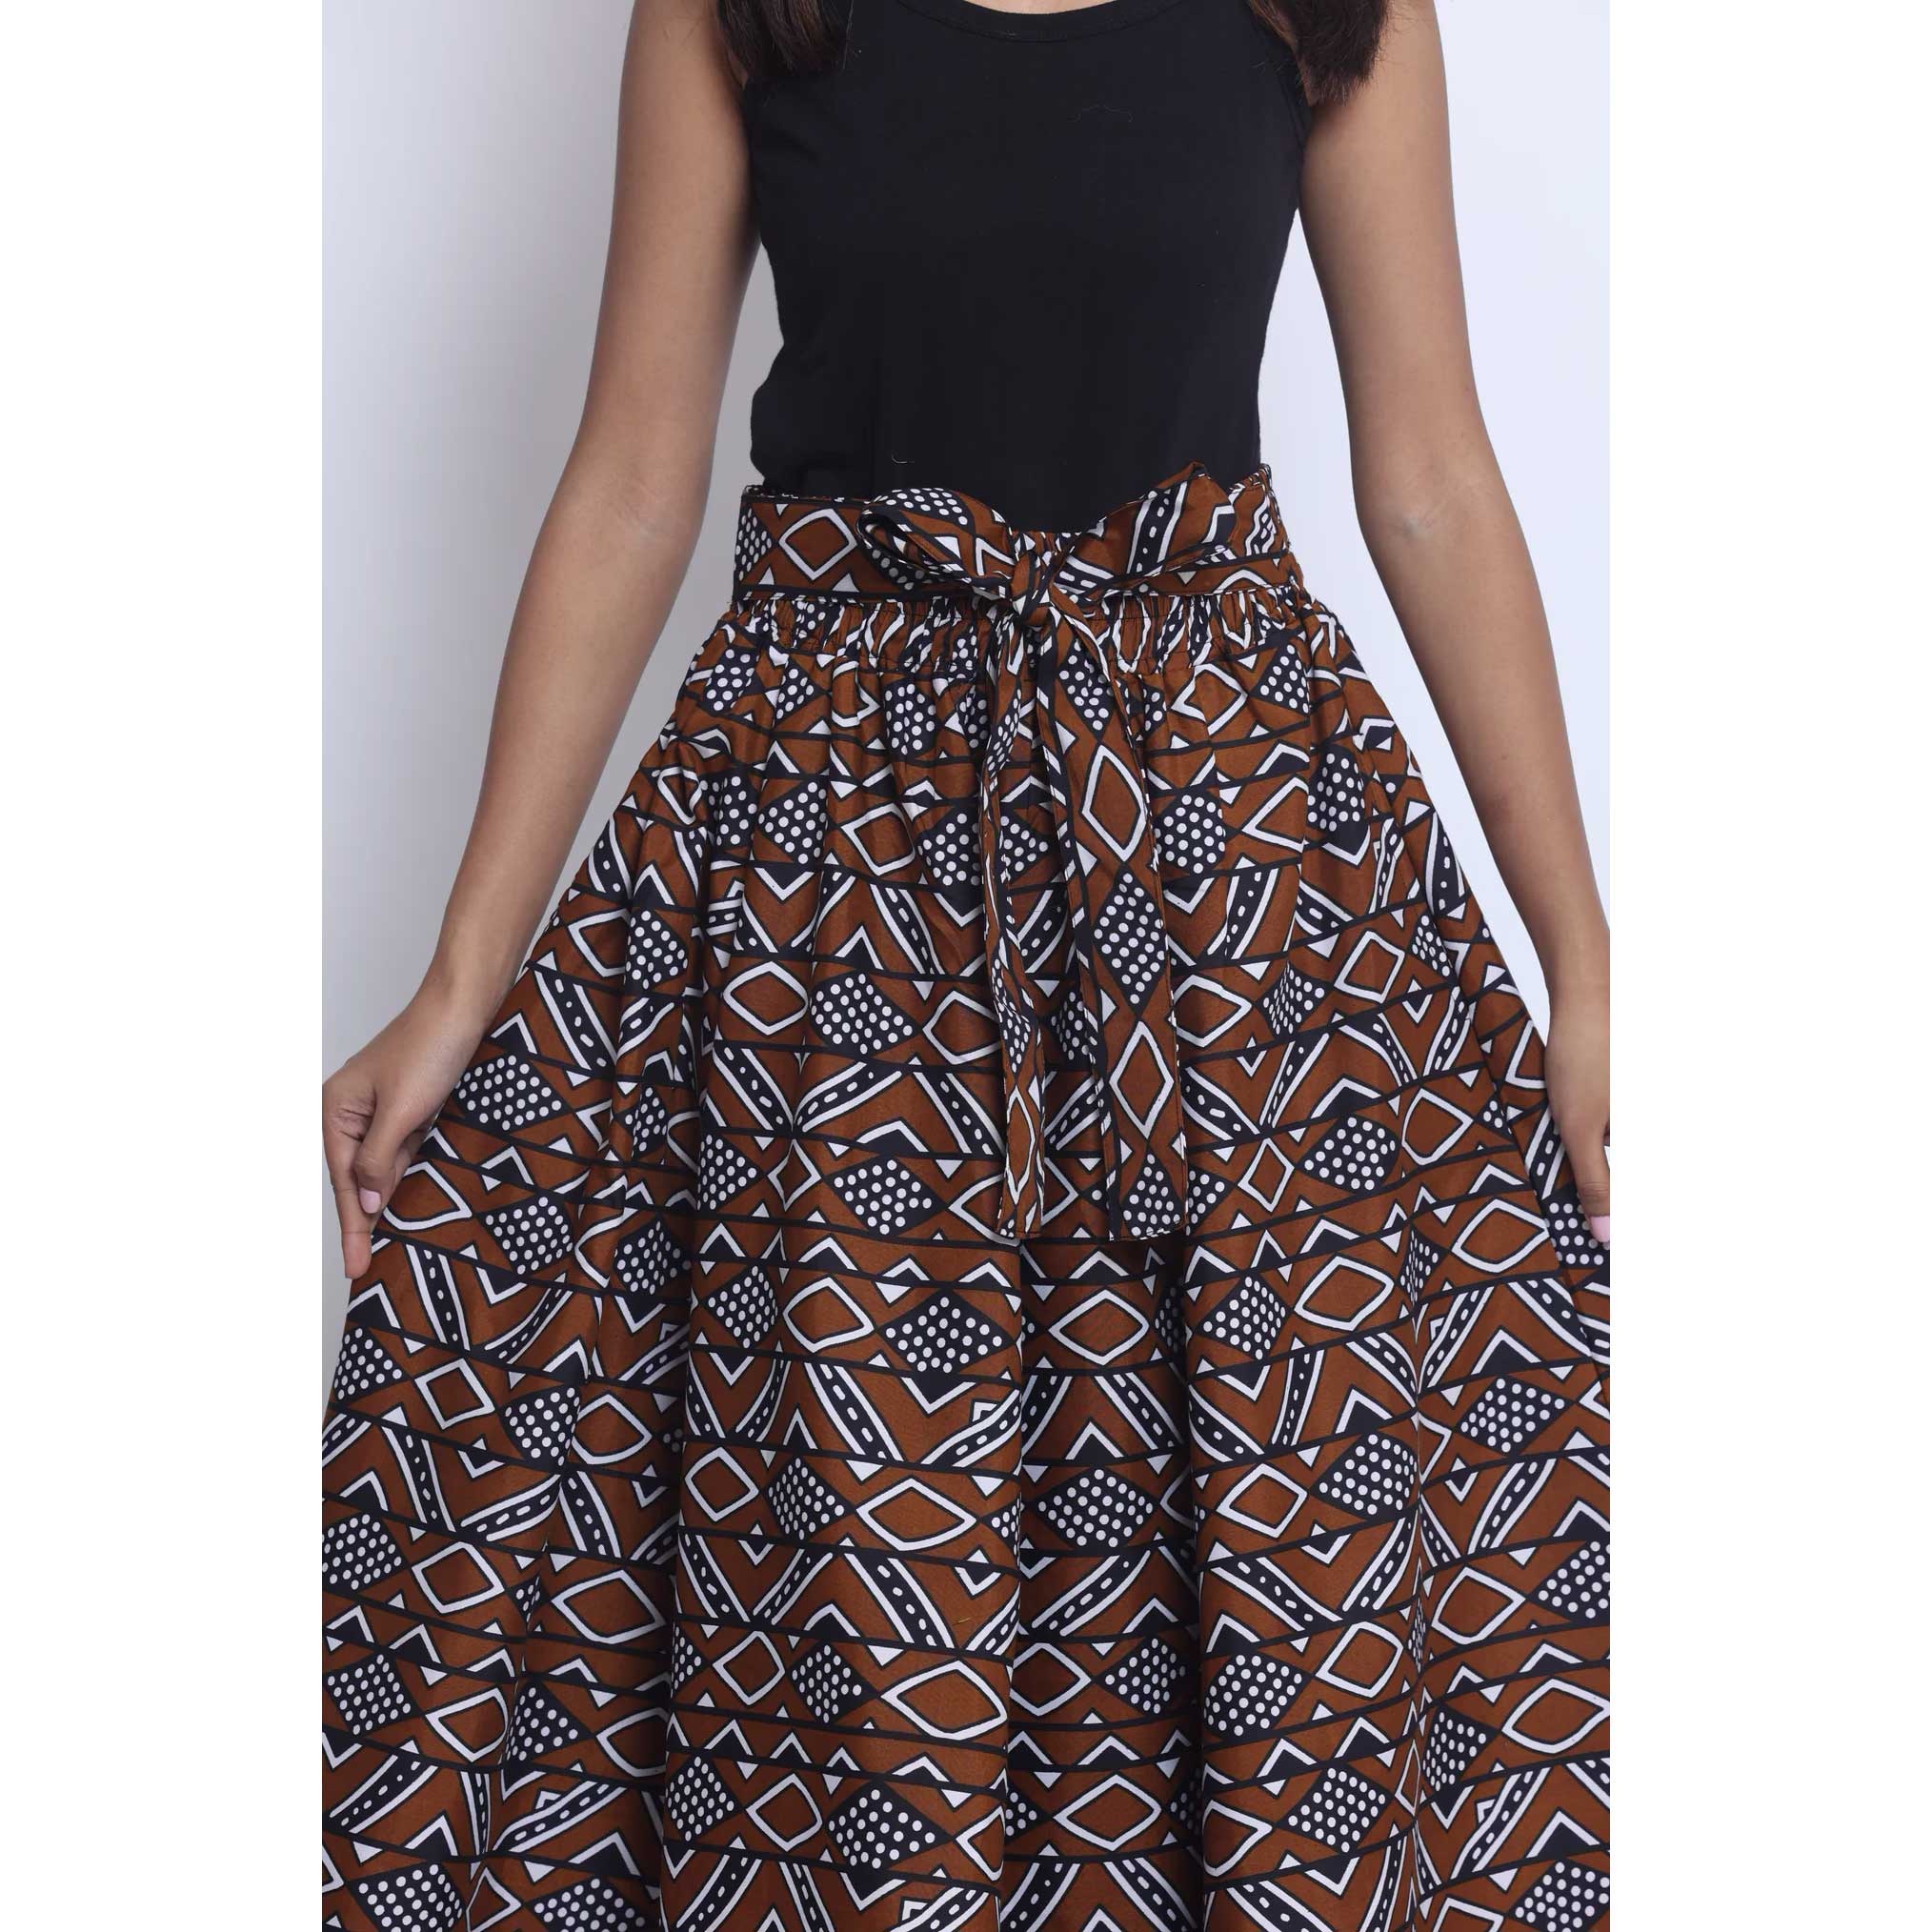 Women's Printed 8 Panel Maxi Skirt with Headwrap -- OM-40R